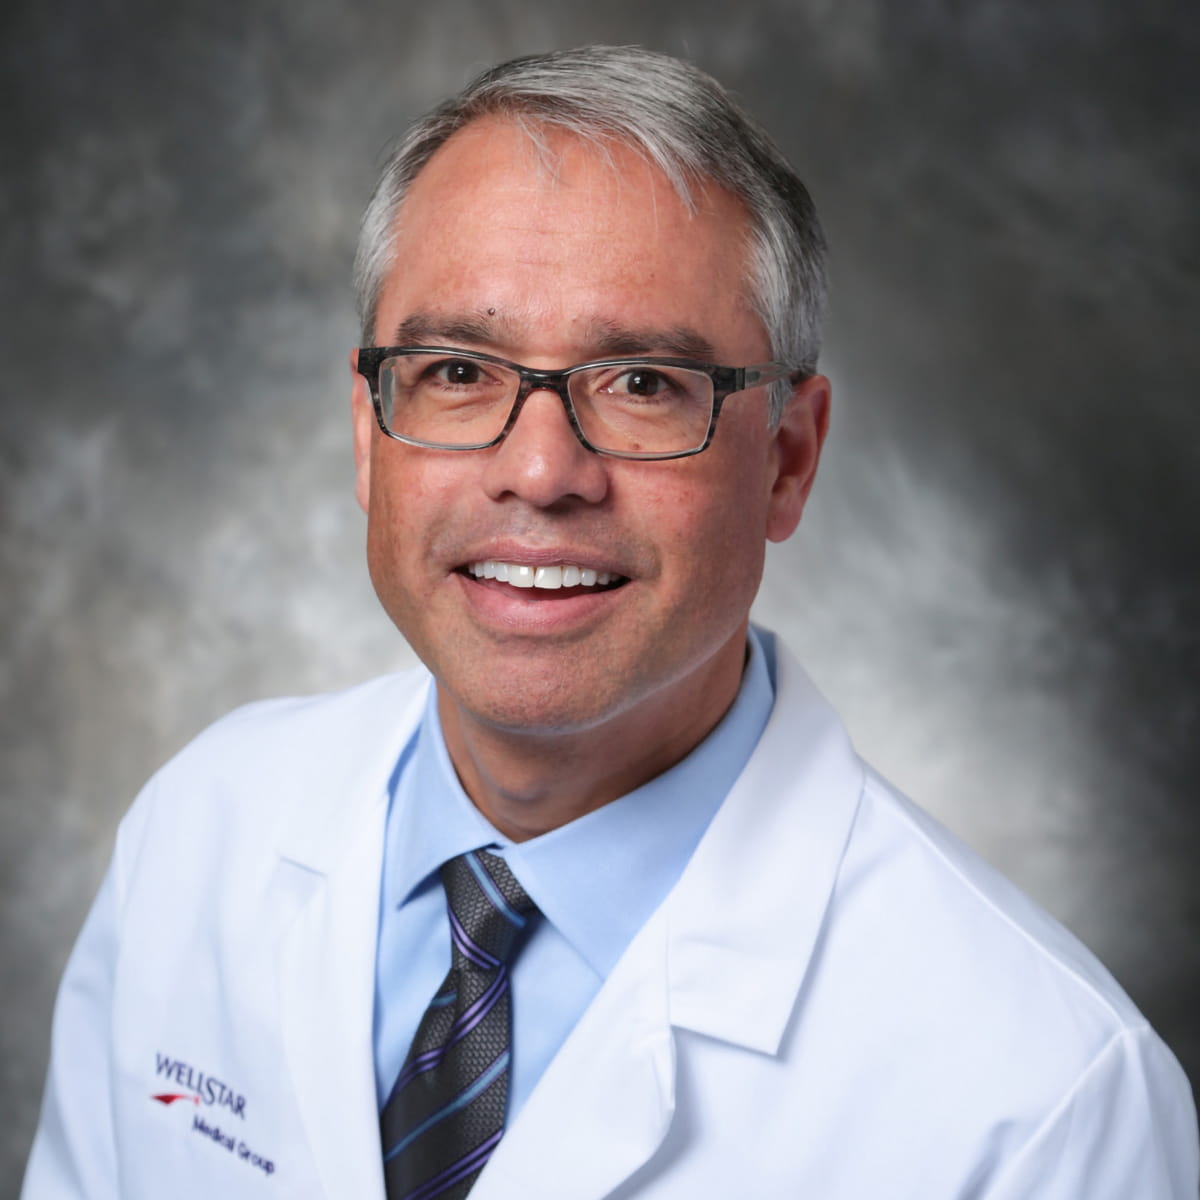 A friendly headshot of Peter Jungblut, MD